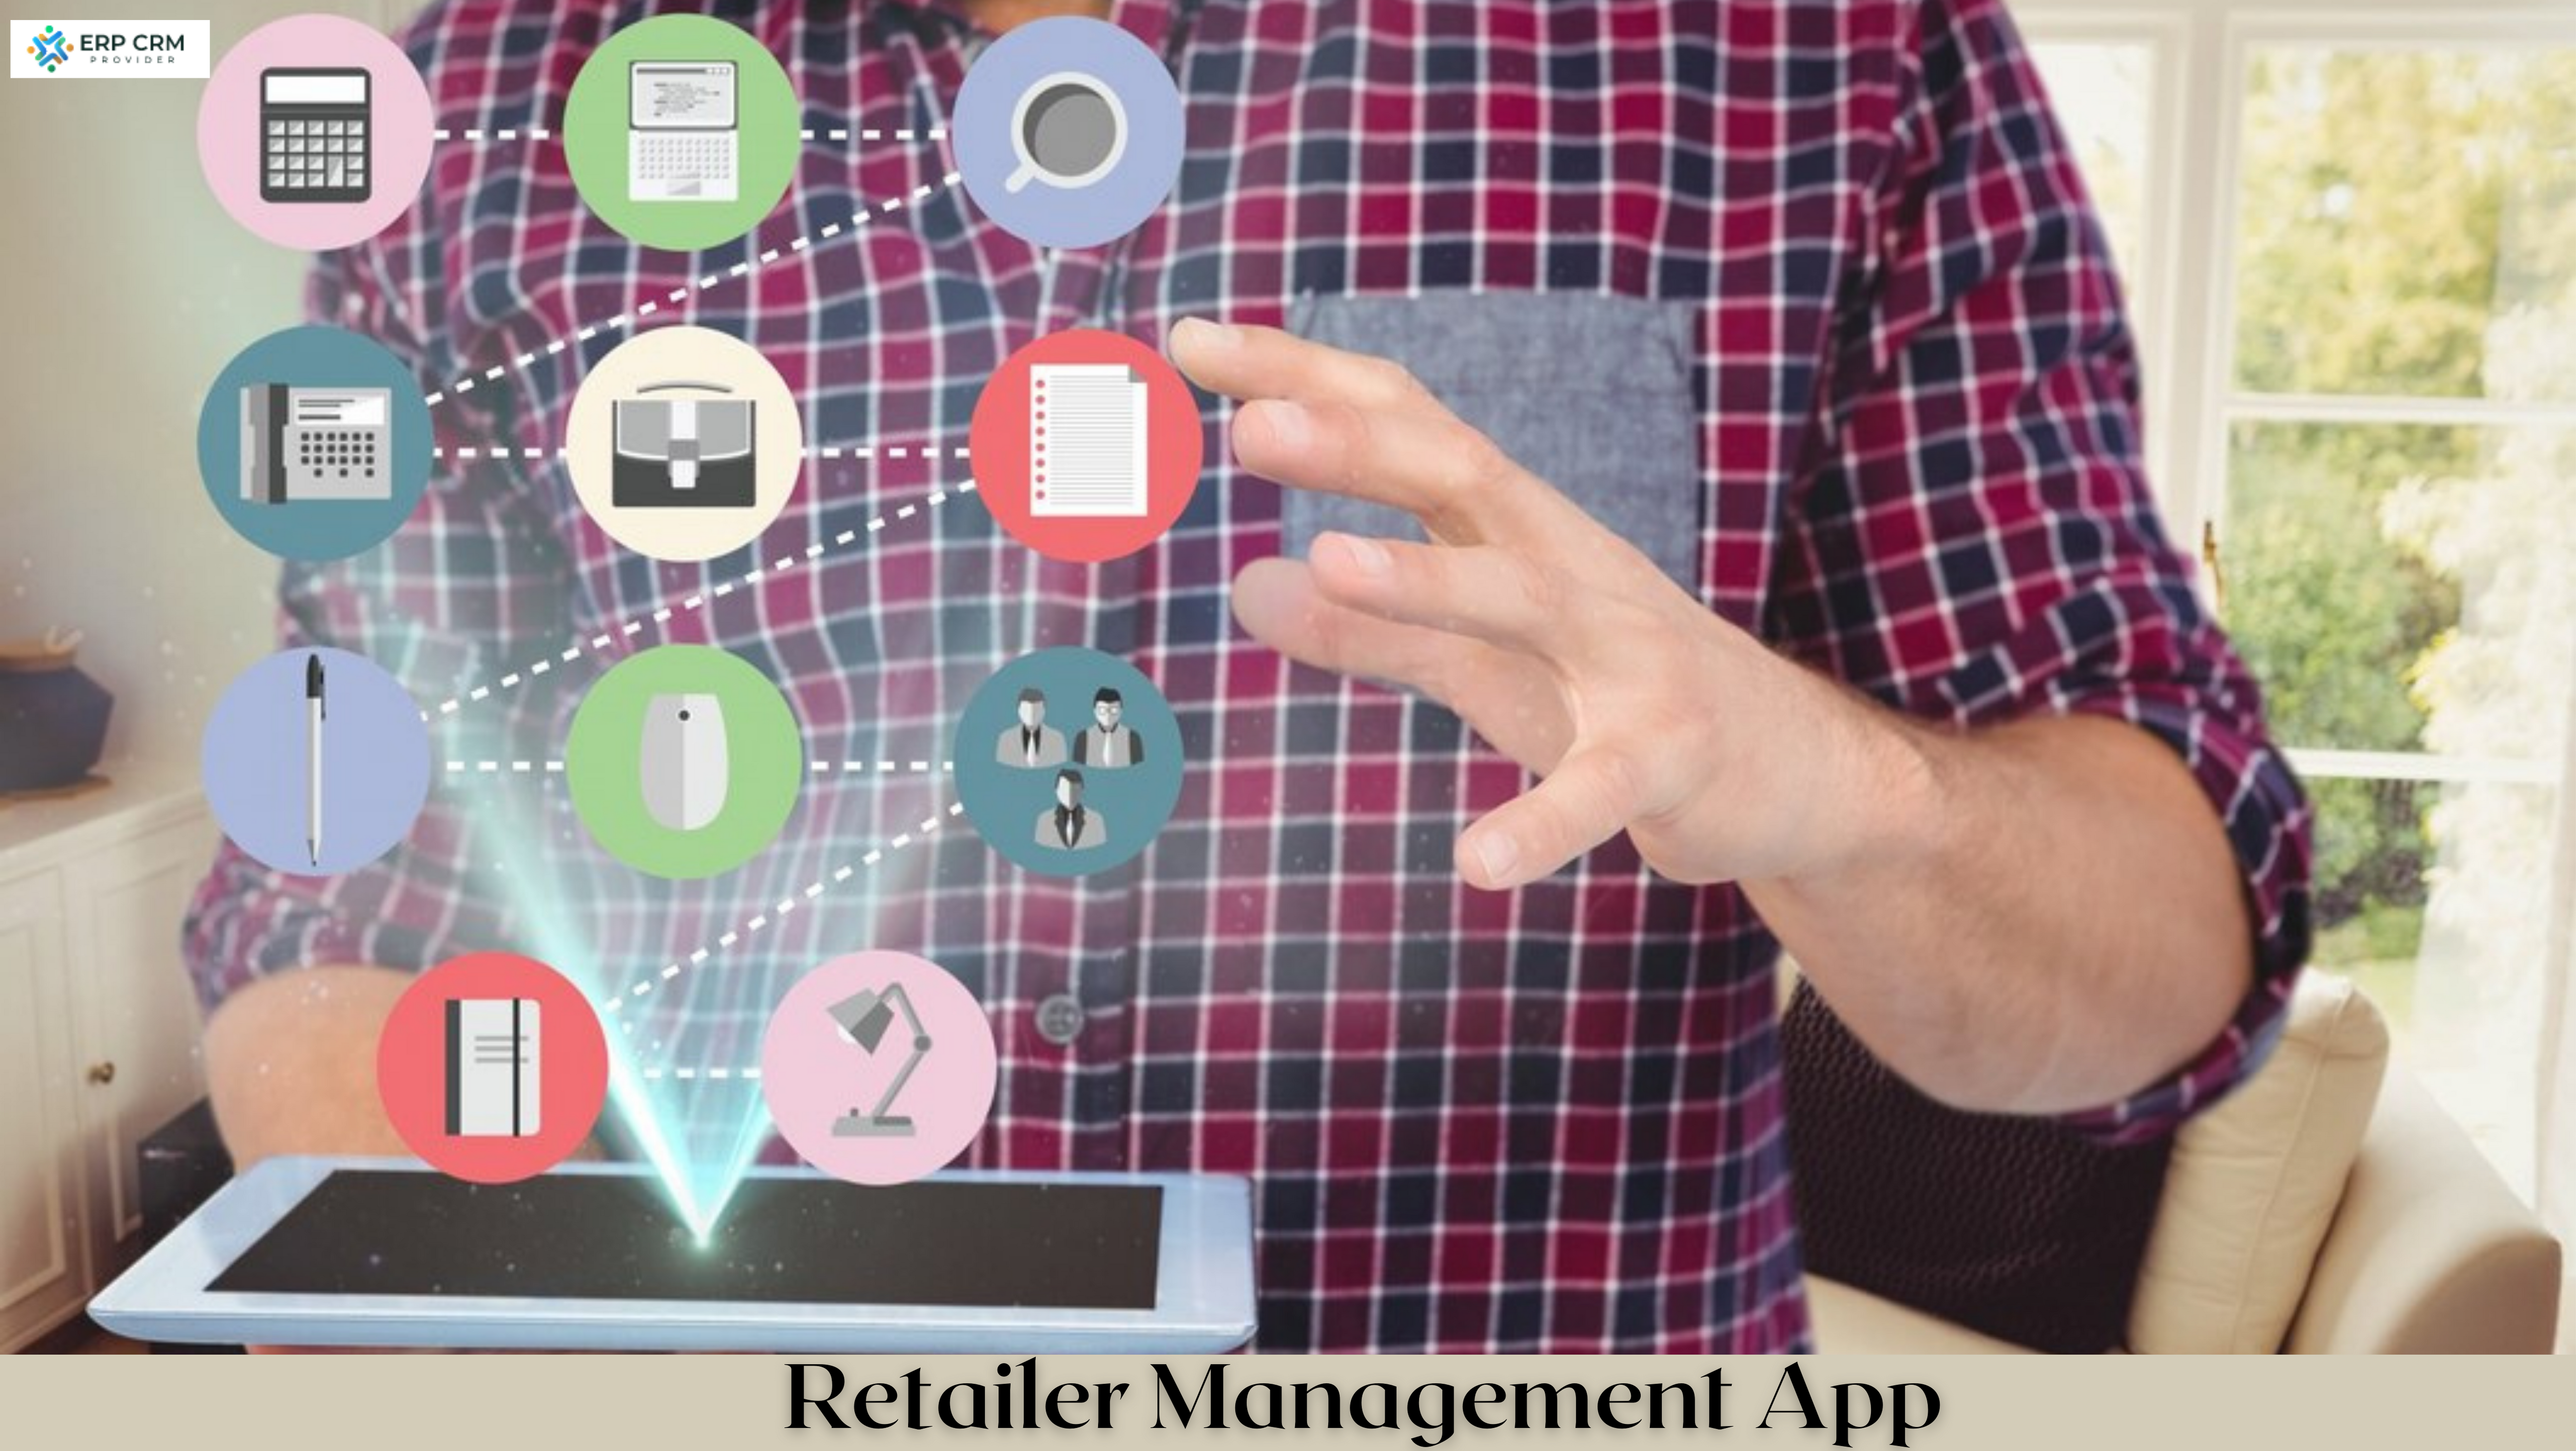 You are currently viewing Take your retail business to the next level with the Ultimate Retailer Management App